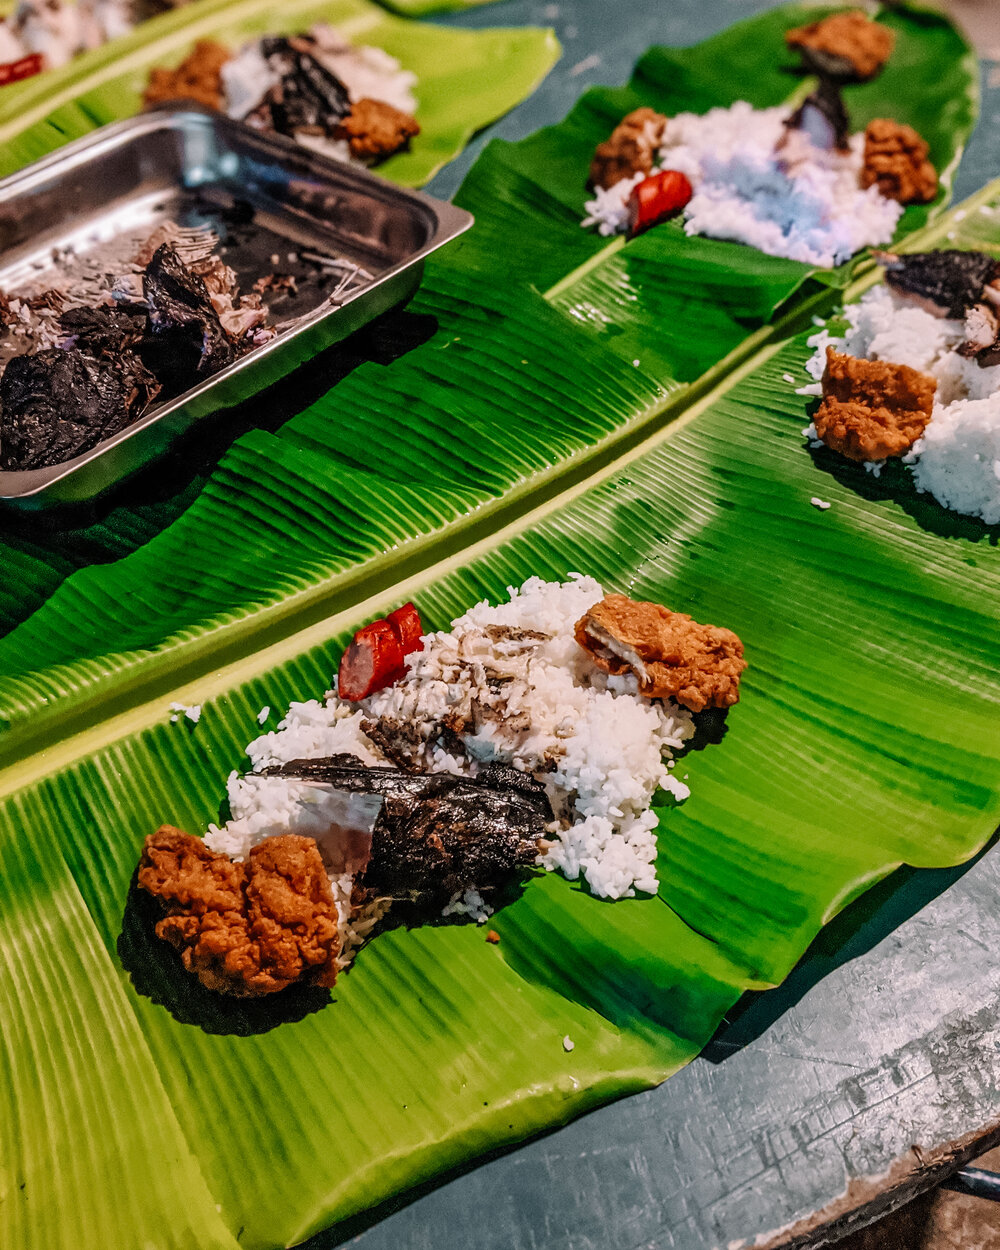 Rachel Off Duty: Boodle Fight, Eating in the Philippines